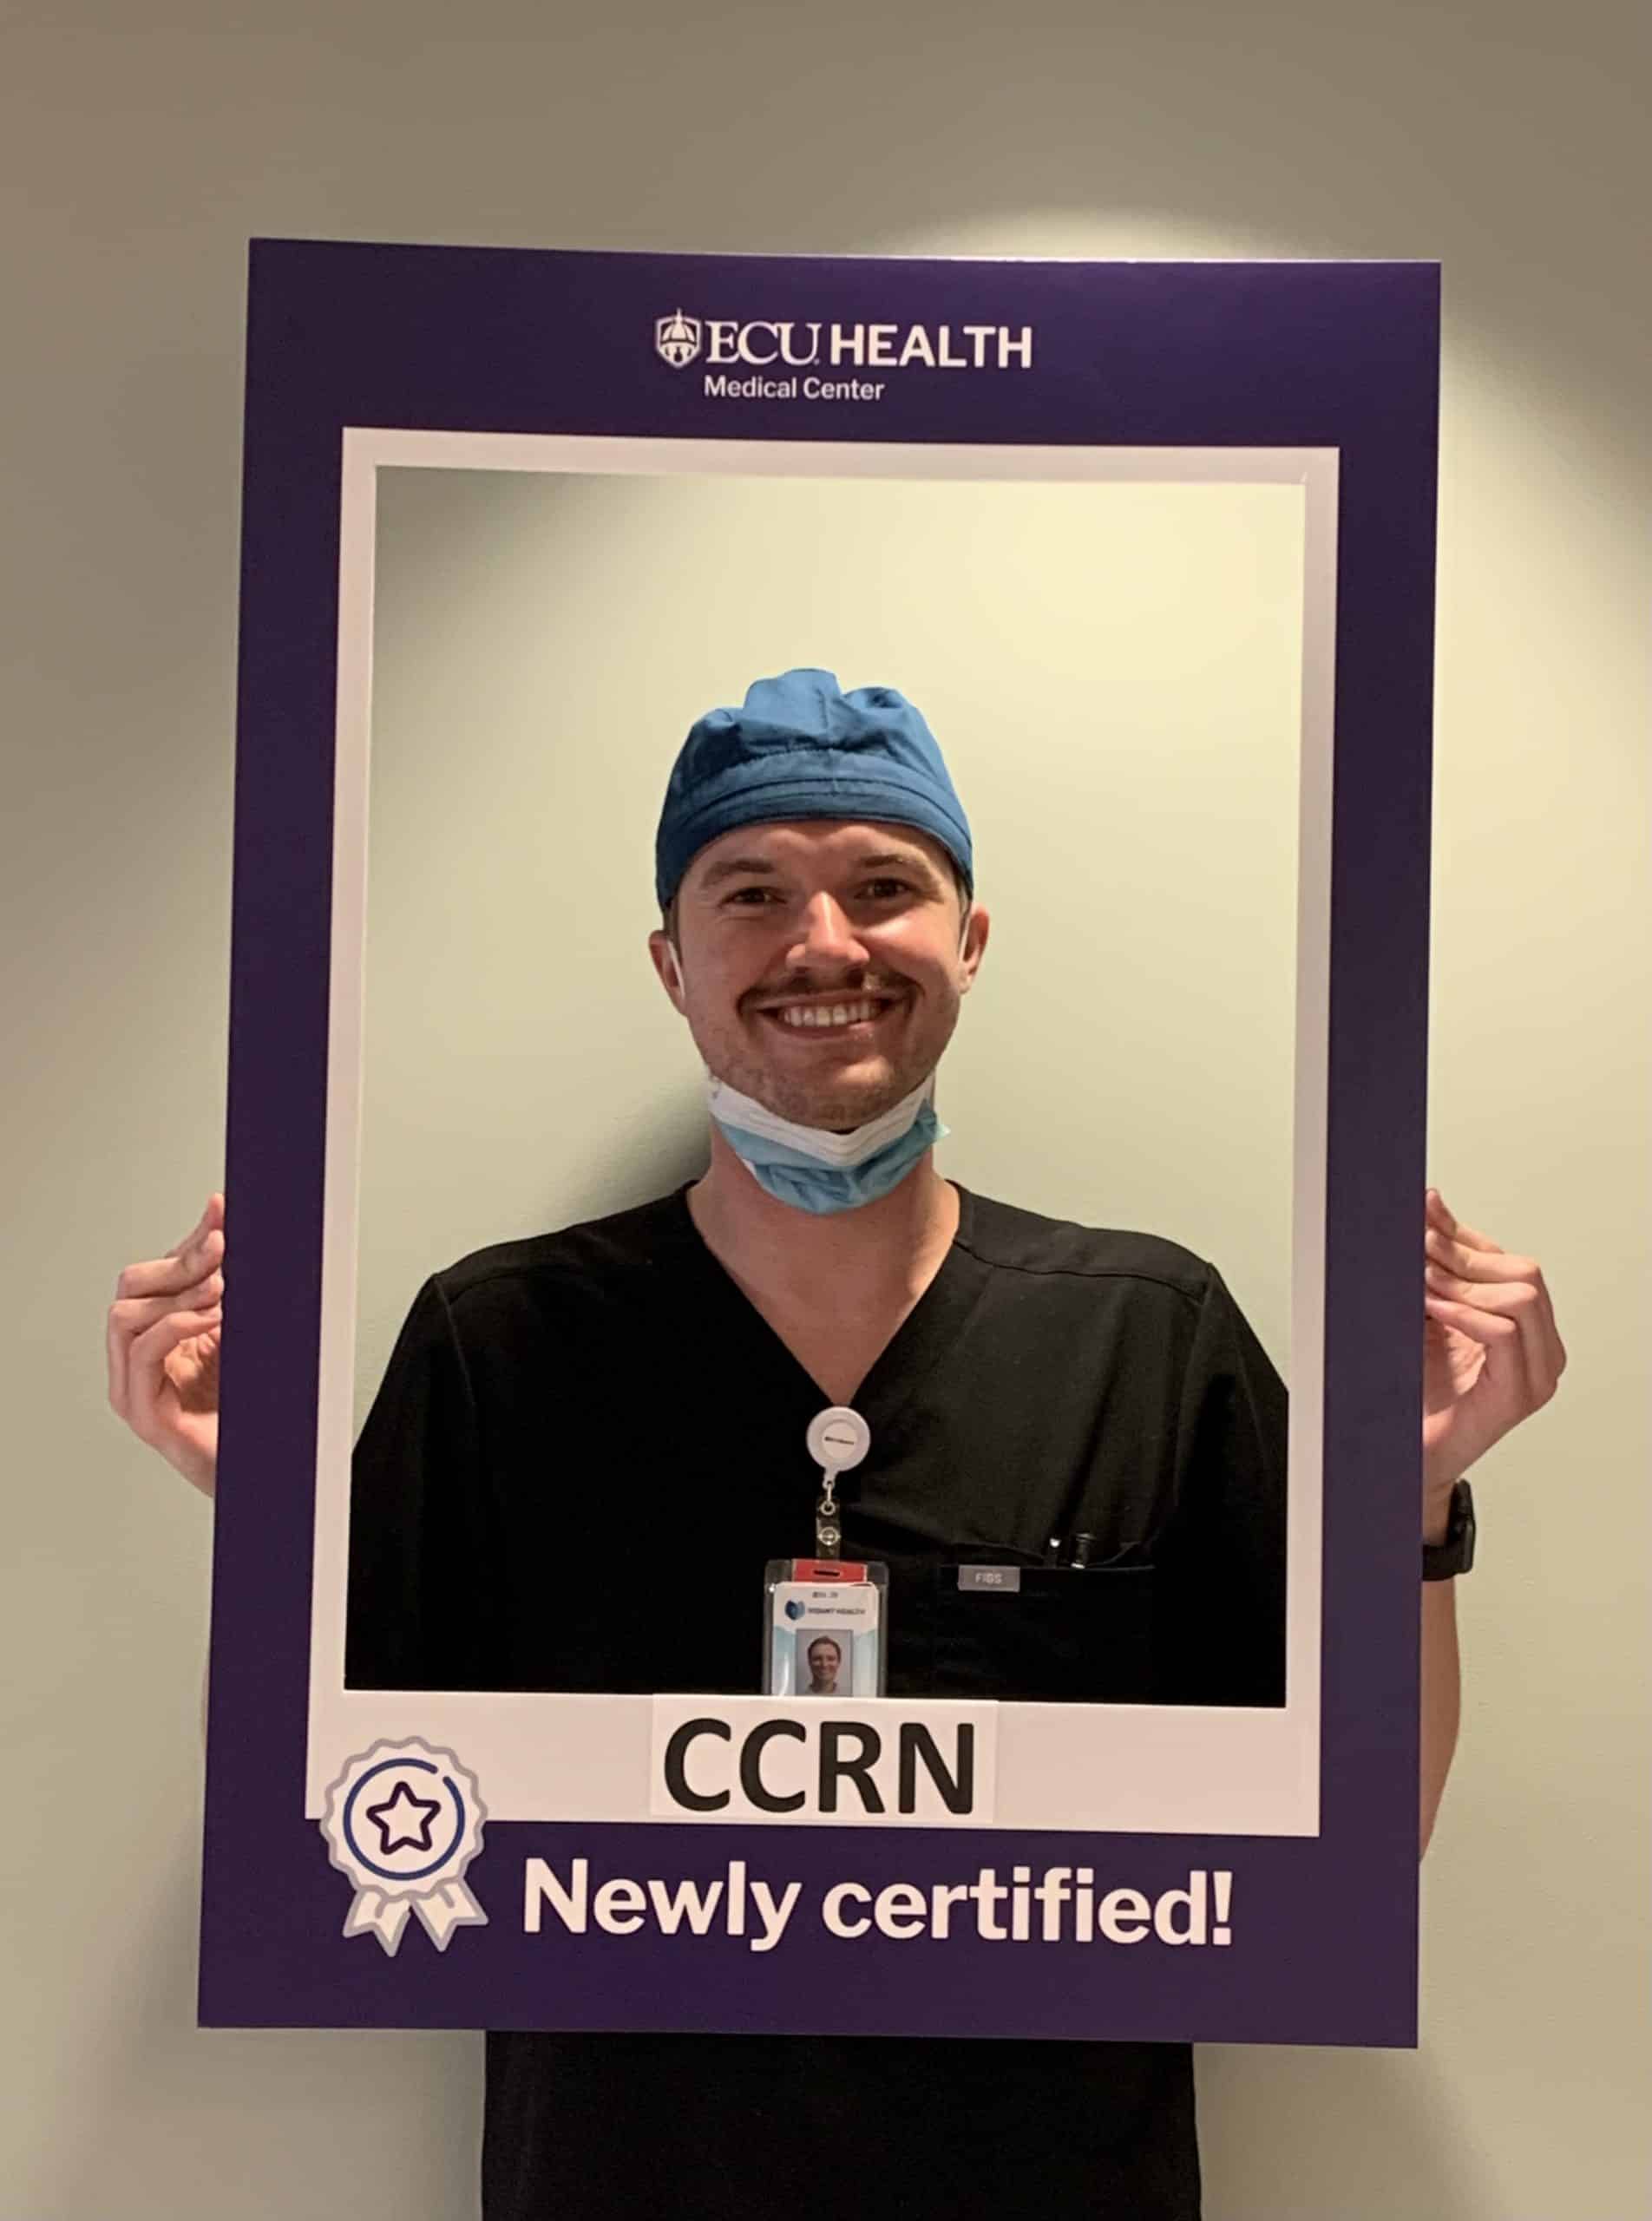 - Connor Archer, BSN, RN, CCRN, works on SICU and received his Critical Care Registered Nurse (CCRN) certification